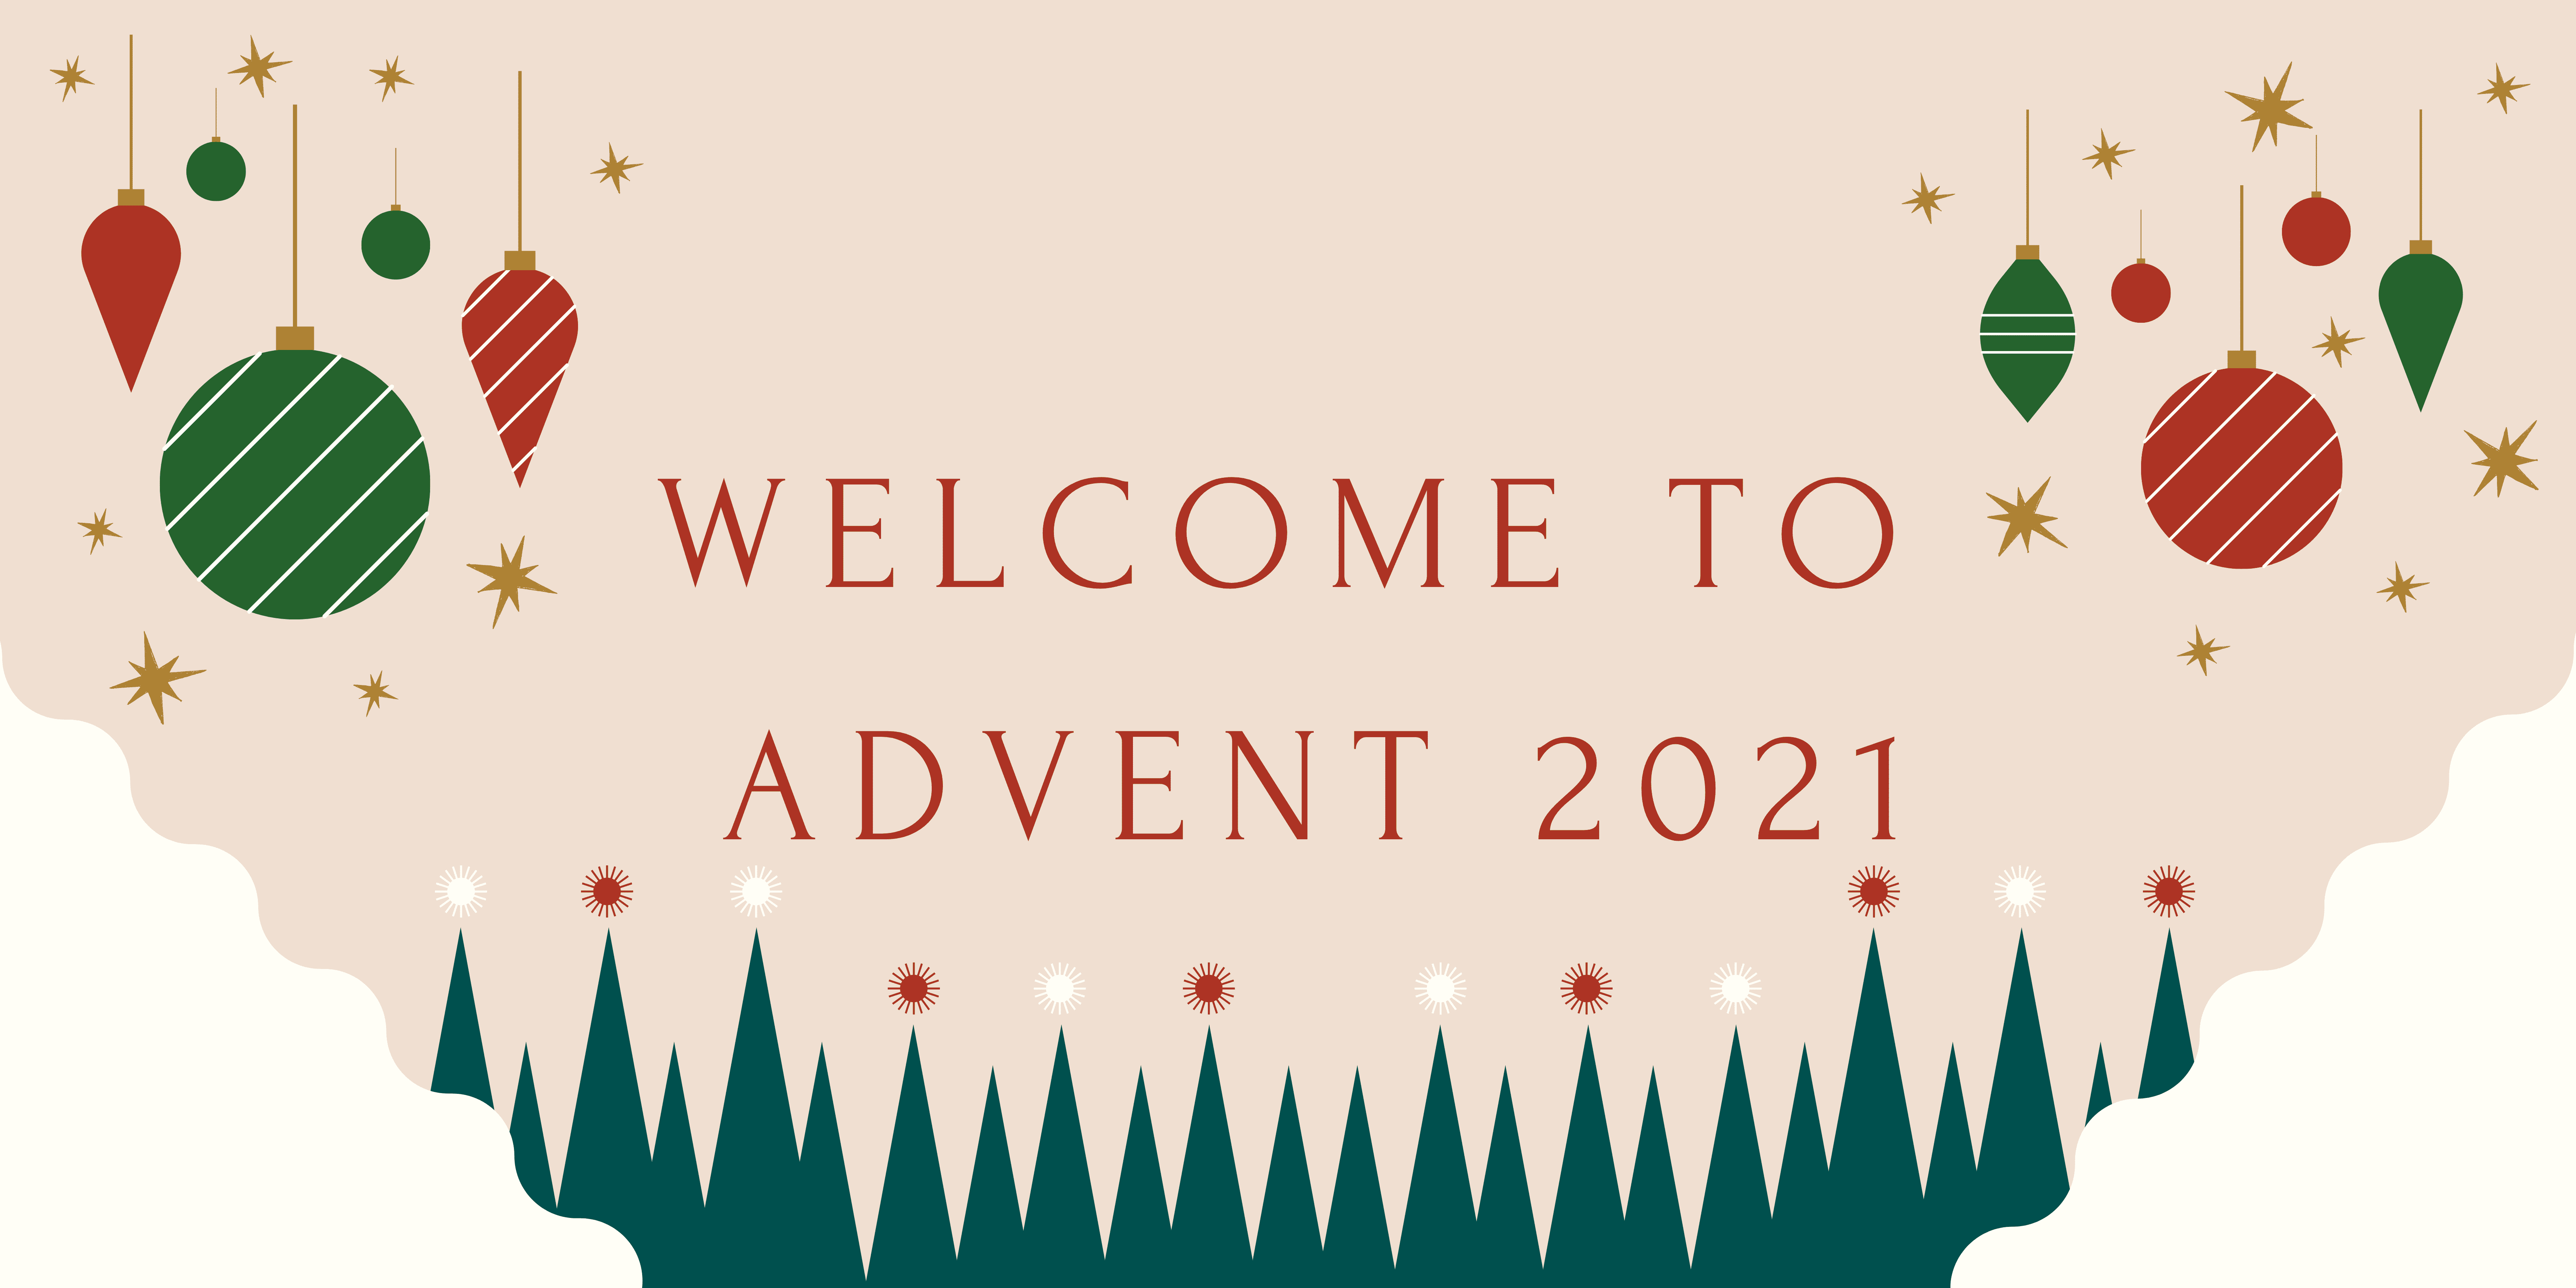 Welcome to Advent 2021